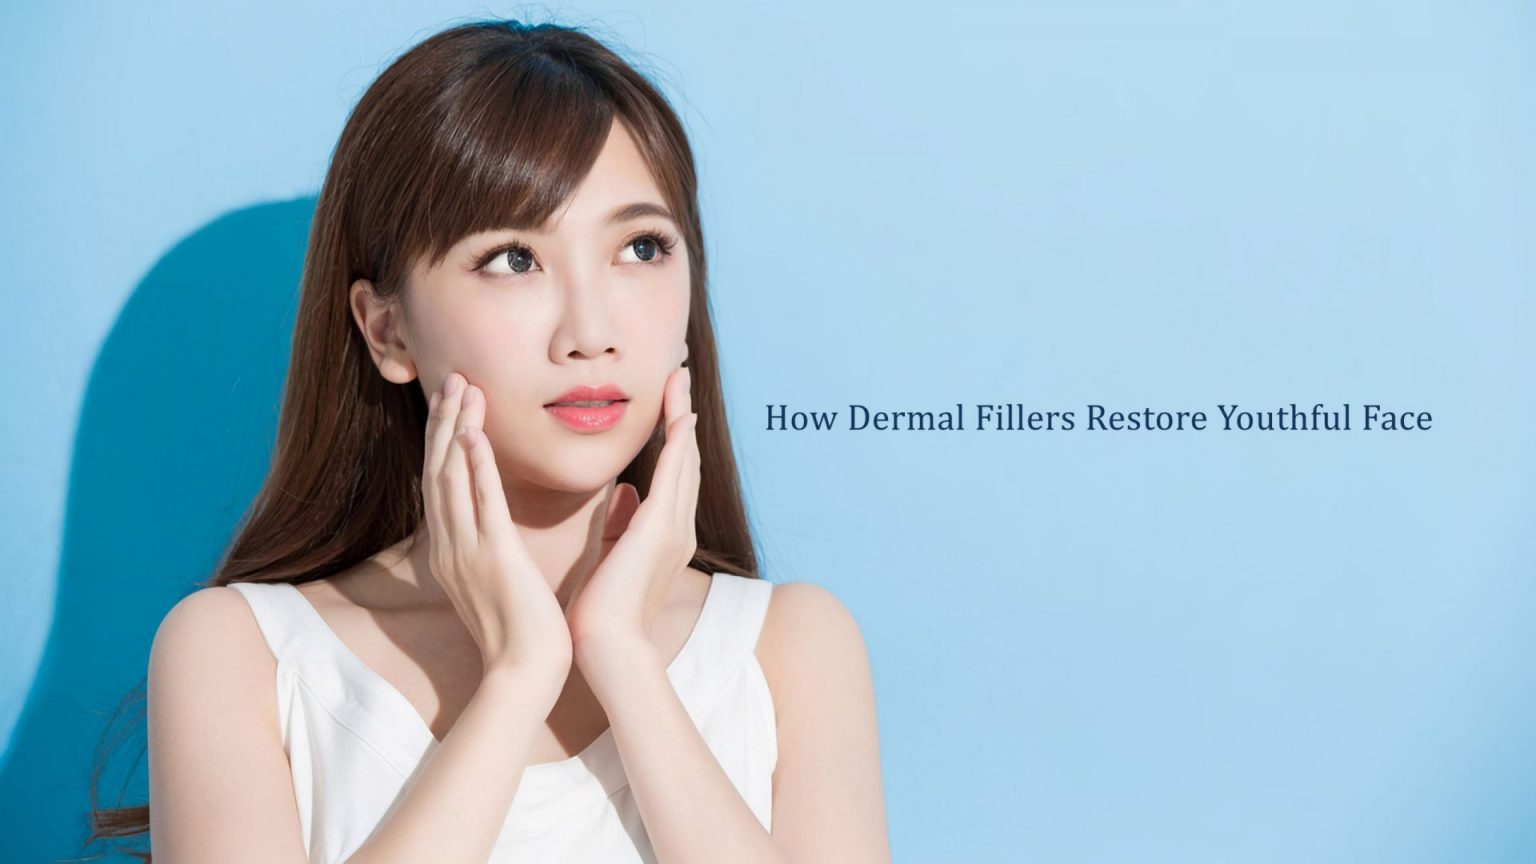 how dermal fillers restore youthful face